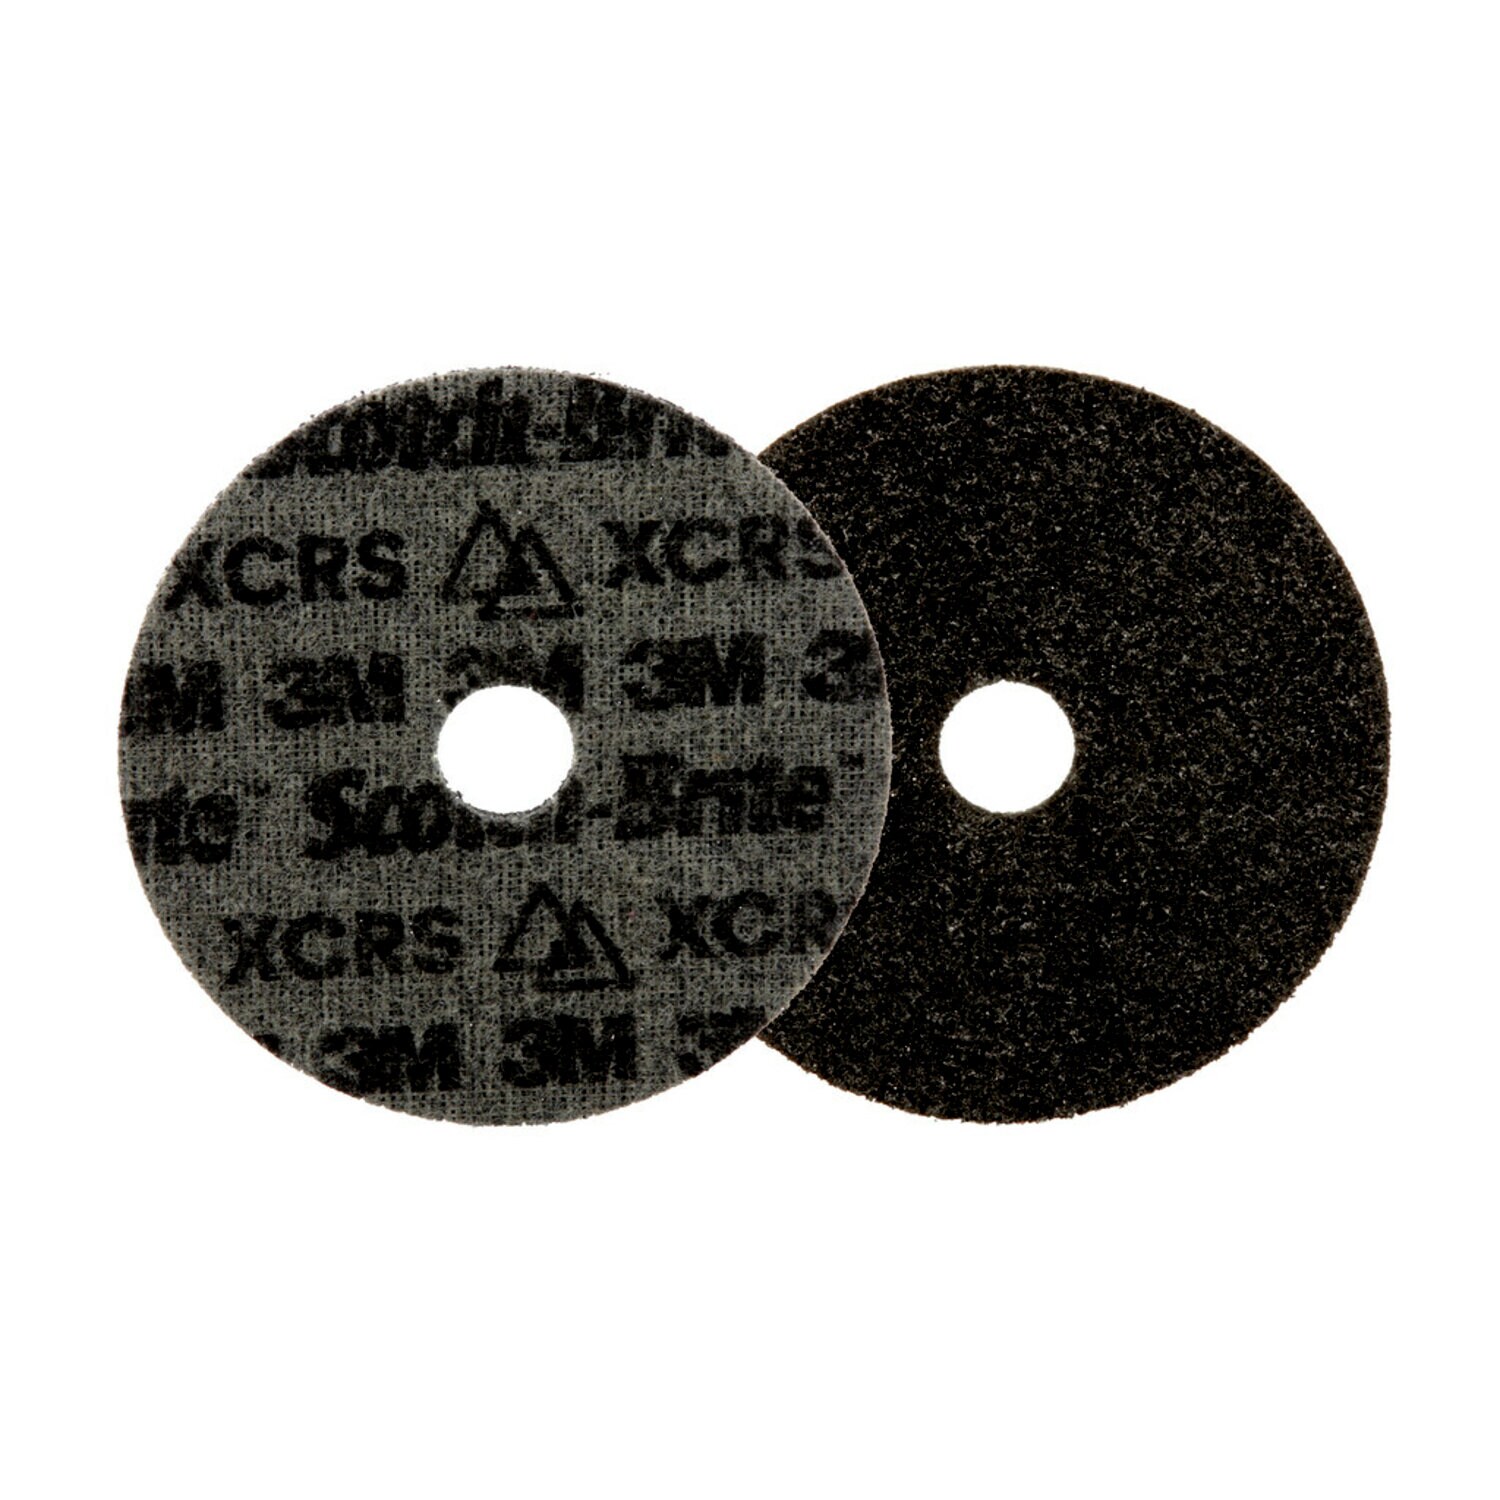 7100263892 - Scotch-Brite Precision Surface Conditioning Disc, PN-DH, Extra Coarse, 5 in x 7/8 in, 50 ea/Case